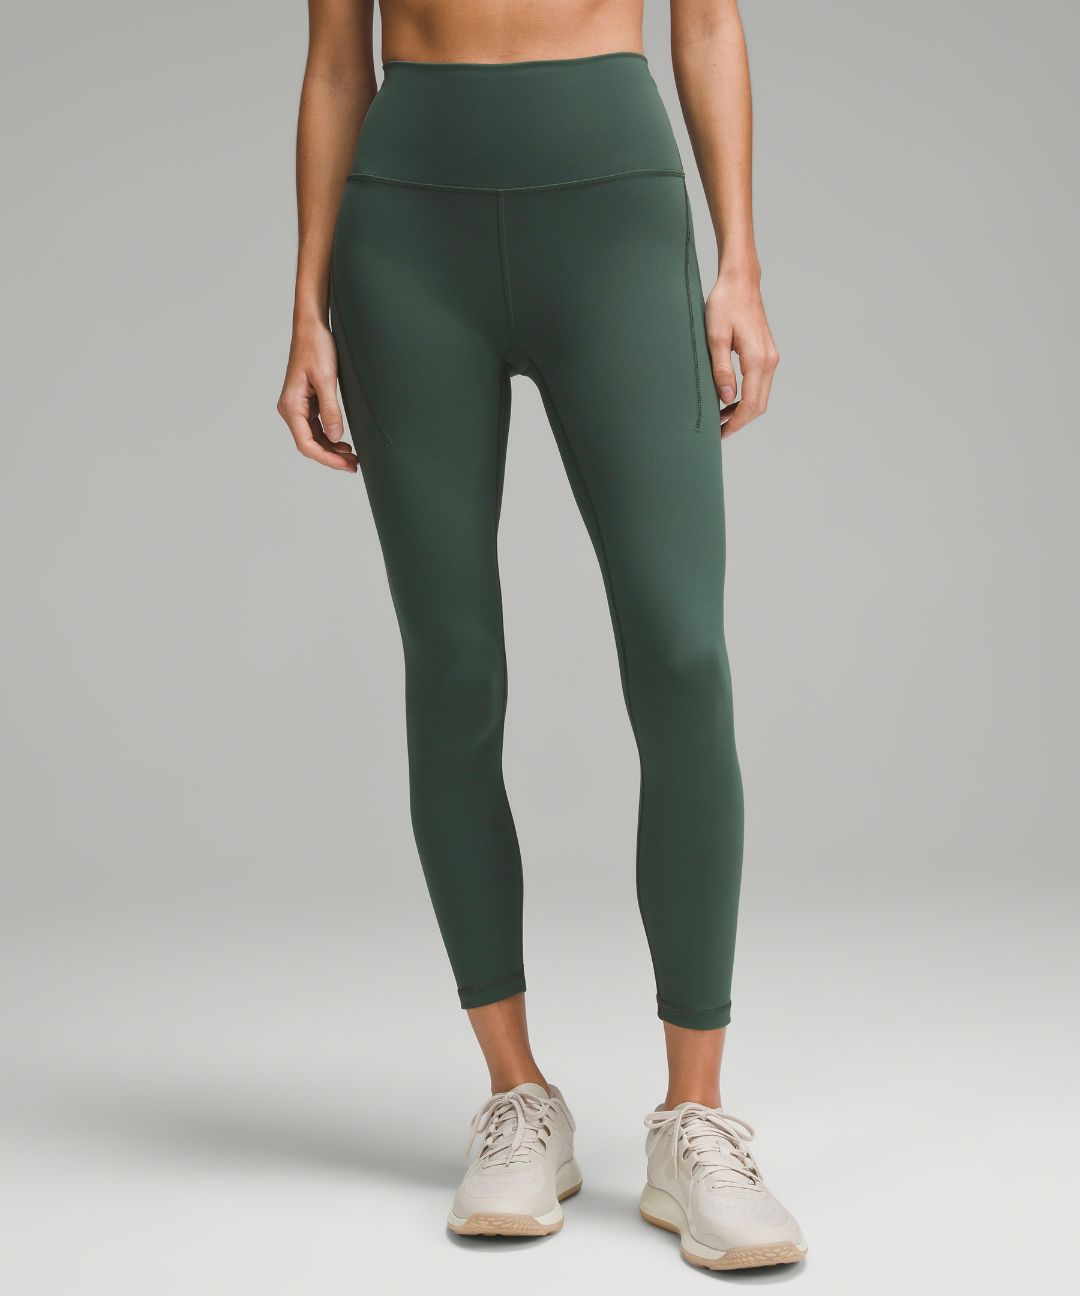 Best Leggings With Pockets: Lululemon Wunder Train High-Rise Tight with Pockets 25